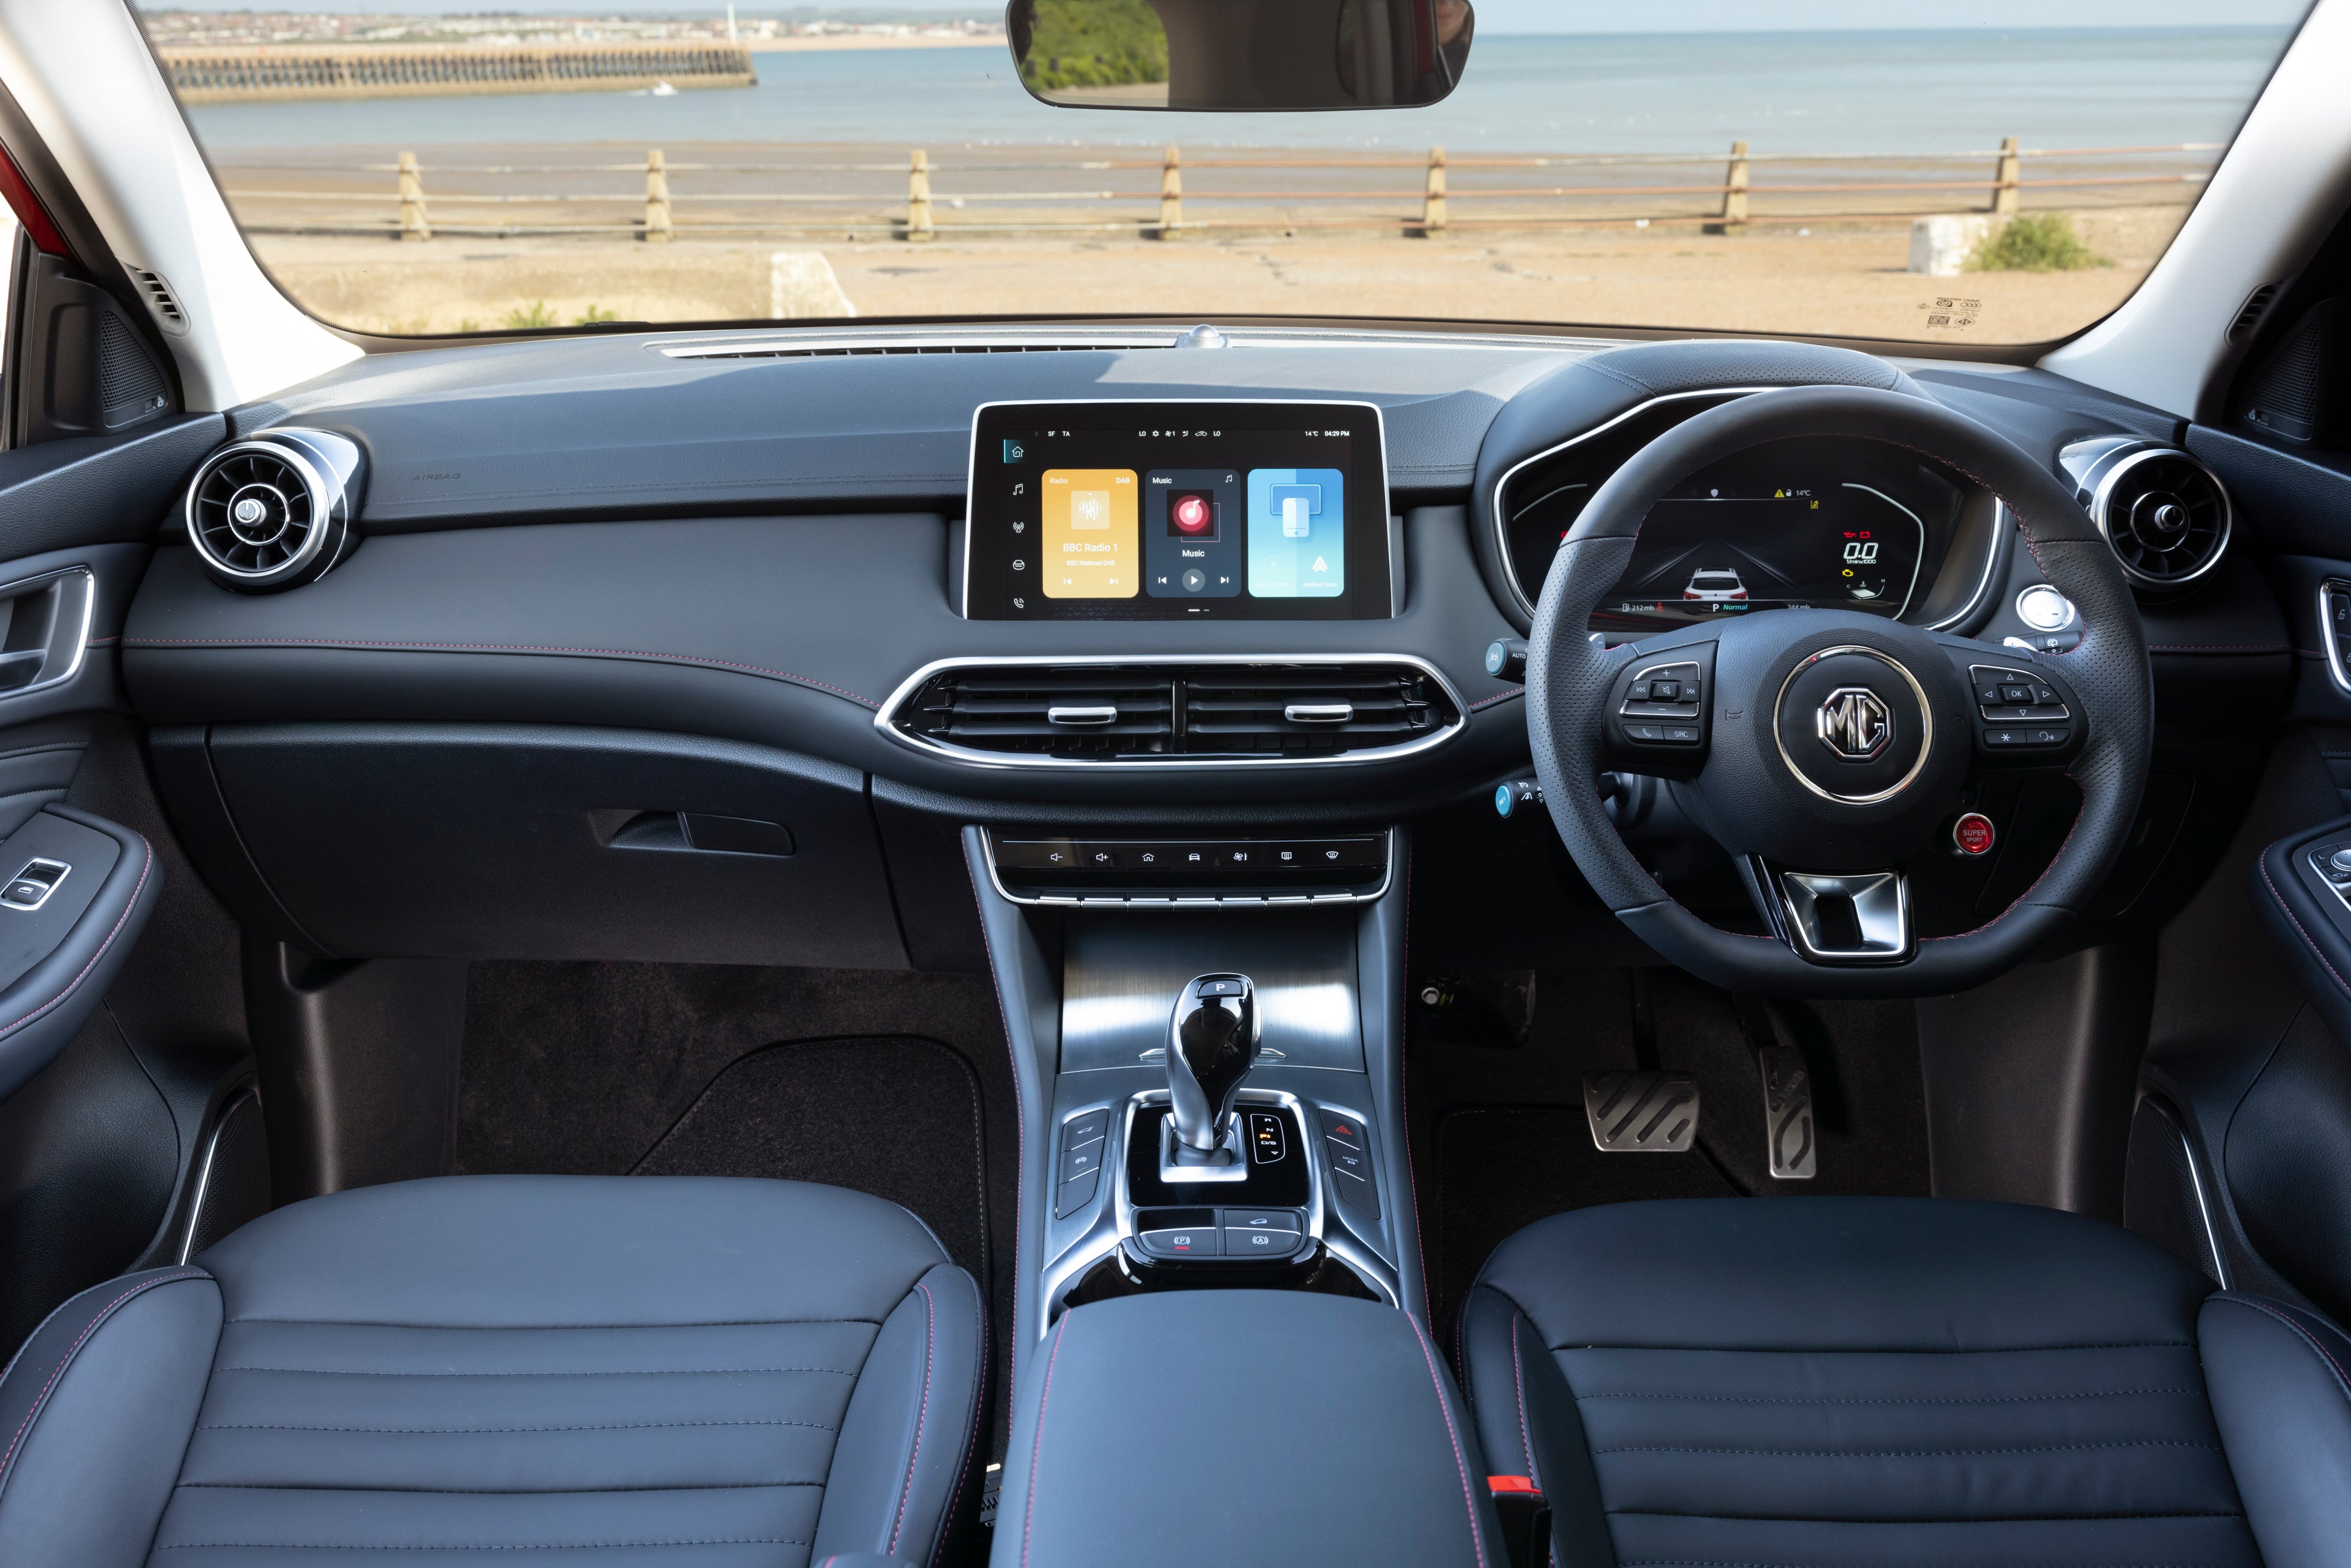 MG HS dashboard showing steering wheel and infotainment